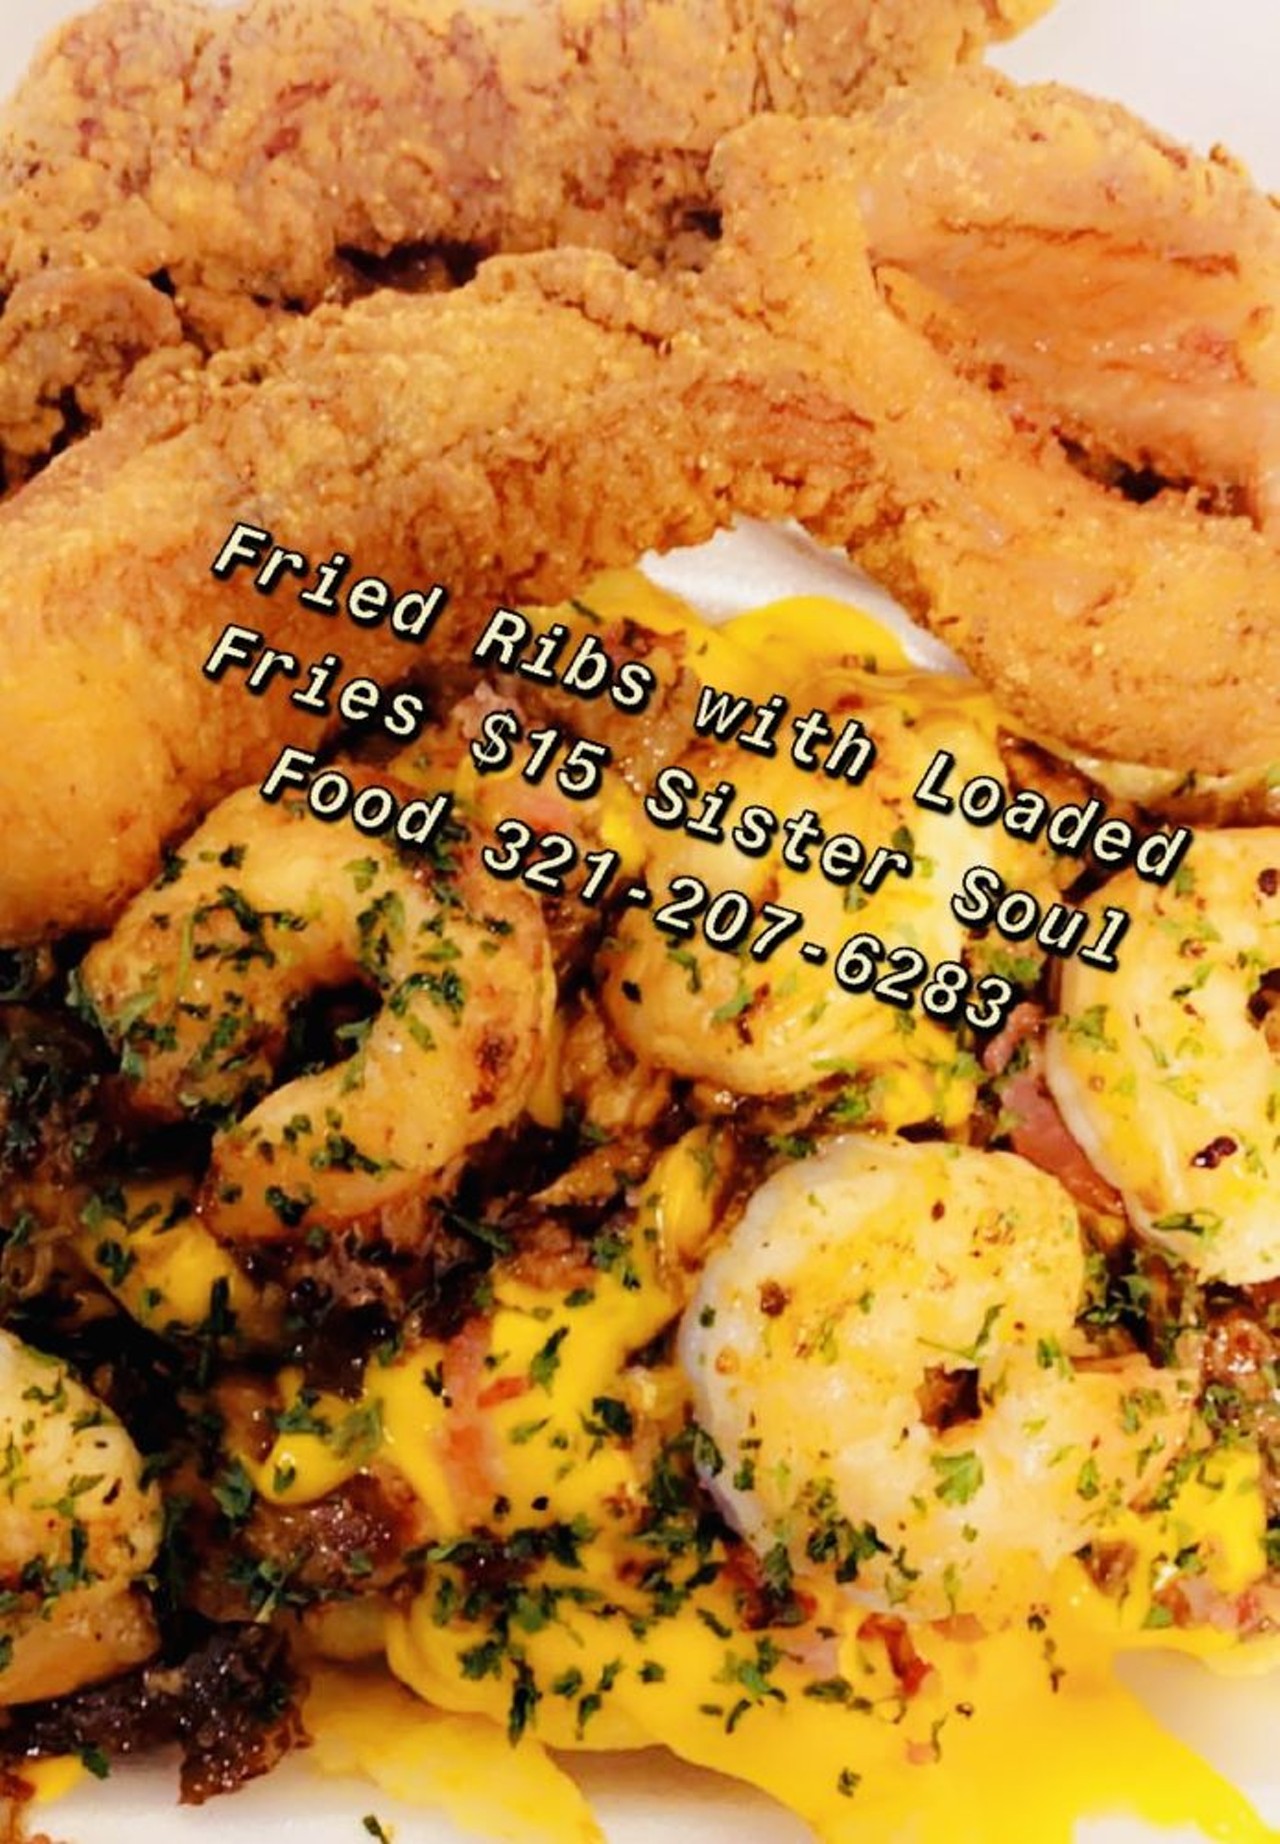 Sister Soul Food 
321-207-6283
Home-made food that is really made in a home. Sister Soul Food offers delivery through Doordash and UberEats or pickup when you call its number. Keep up with its social media to know what the menu is for the day.
Photo via Sister Soul Food/Yelp